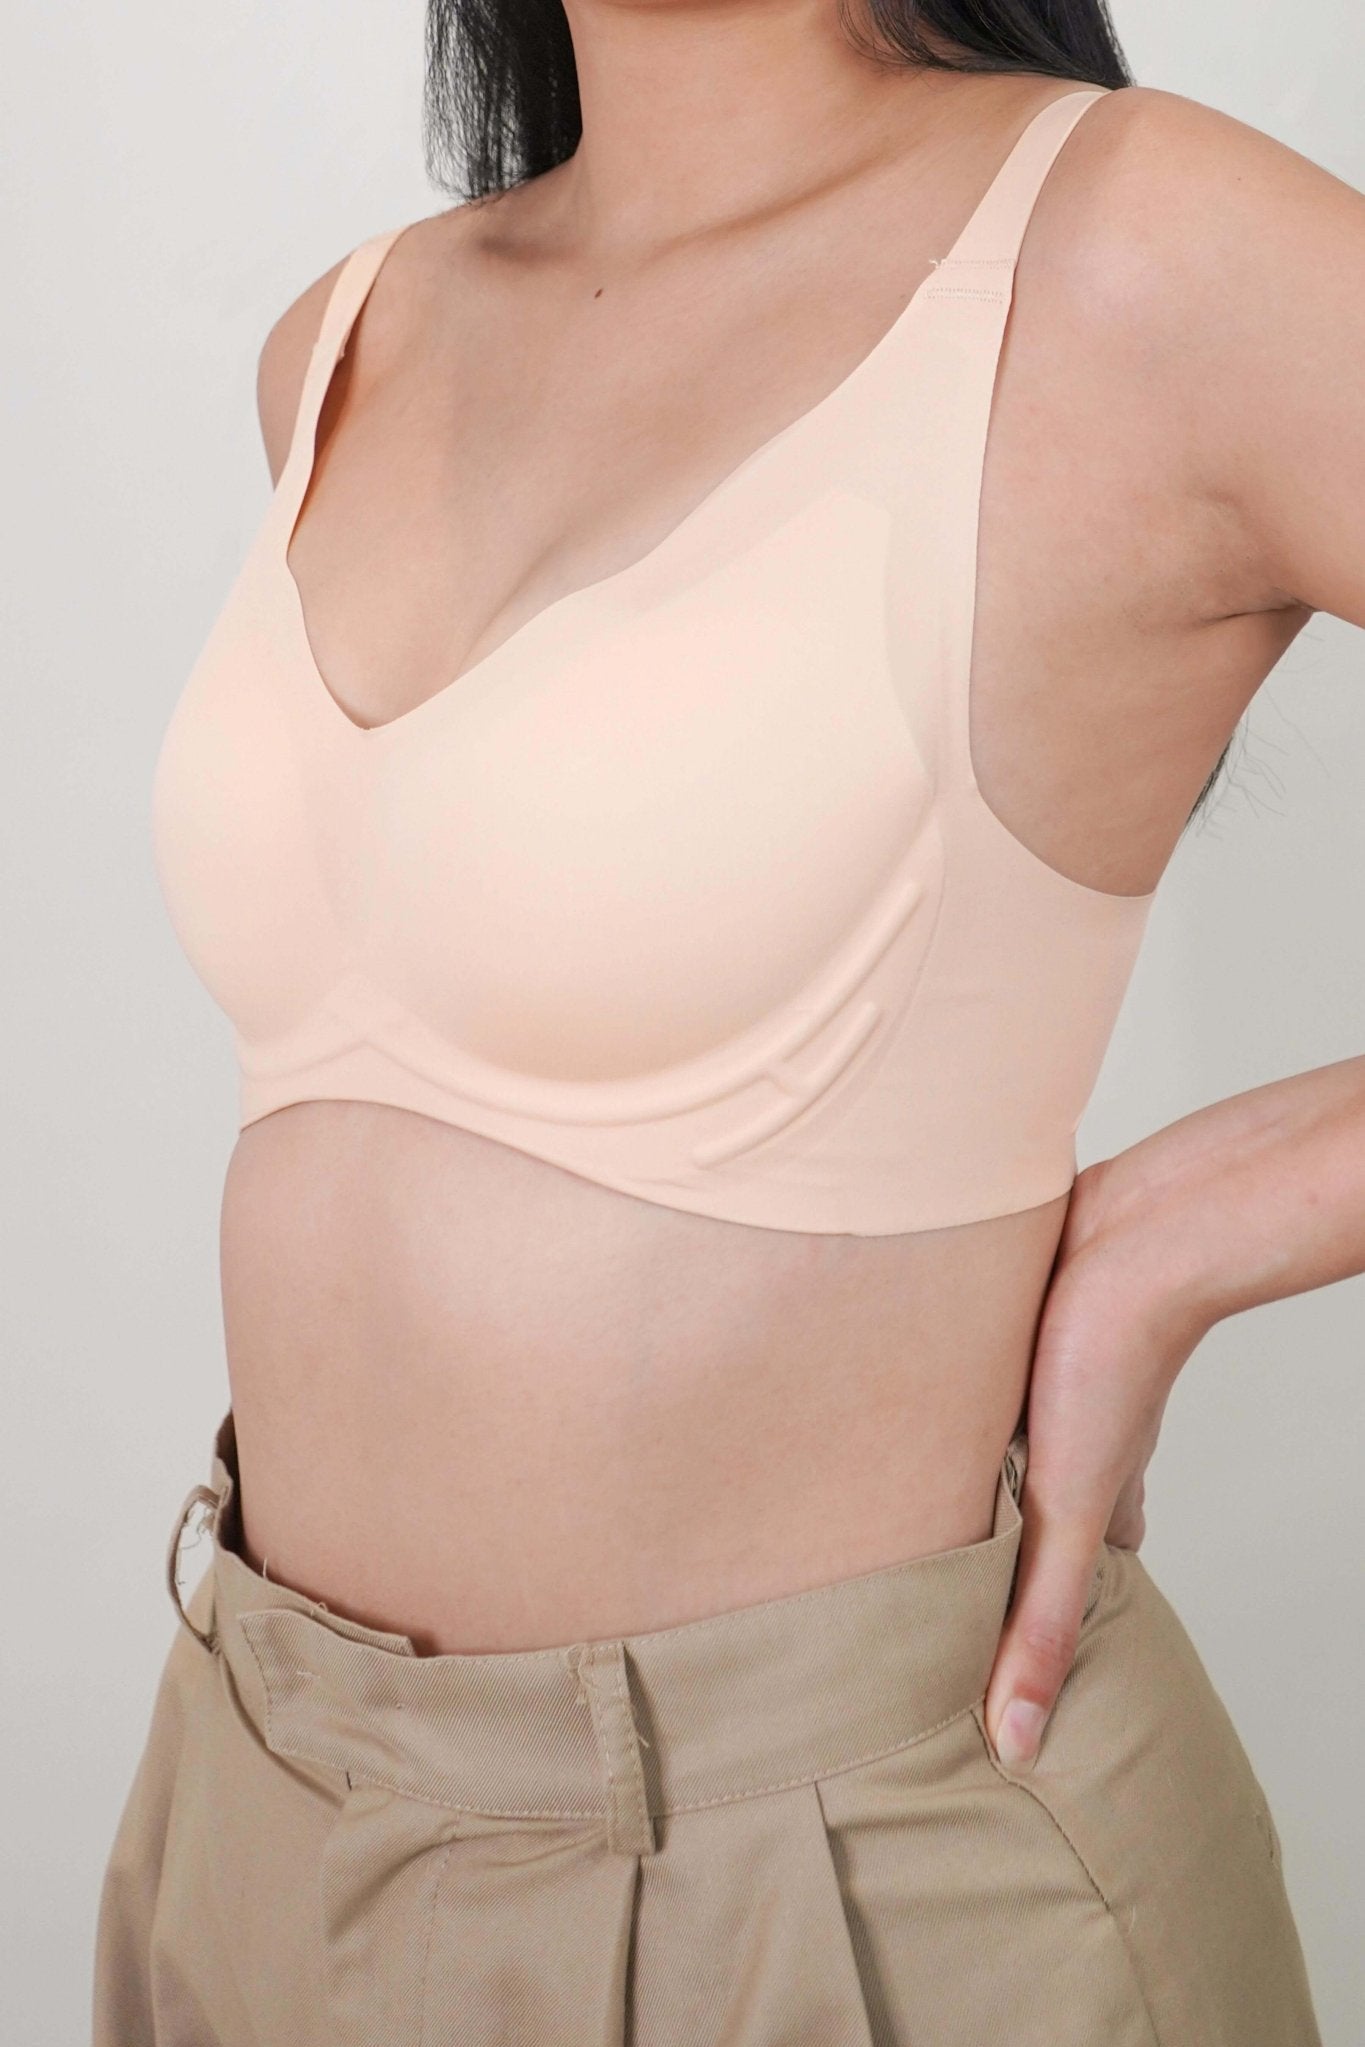 [Star Product] Wavy Support Antigravity Seamless Bra In Blanched Almond - Adelais Official